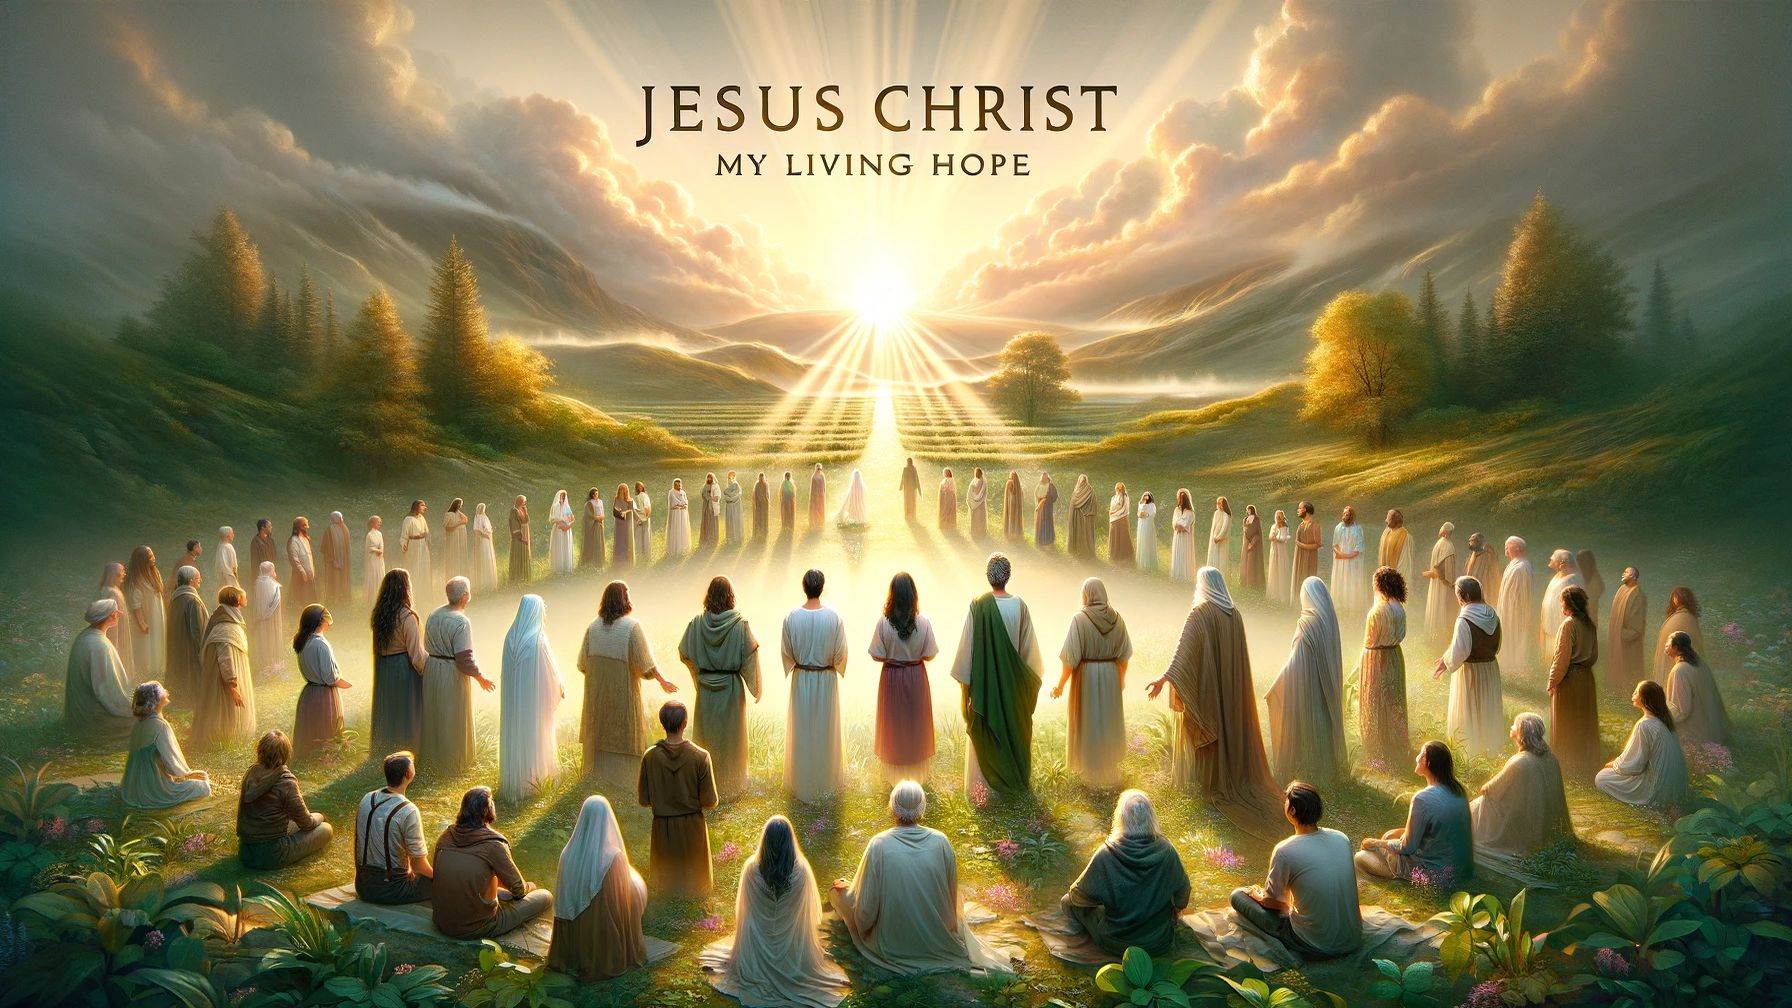 Who Is The Composer Of Jesus Christ My Living Hope